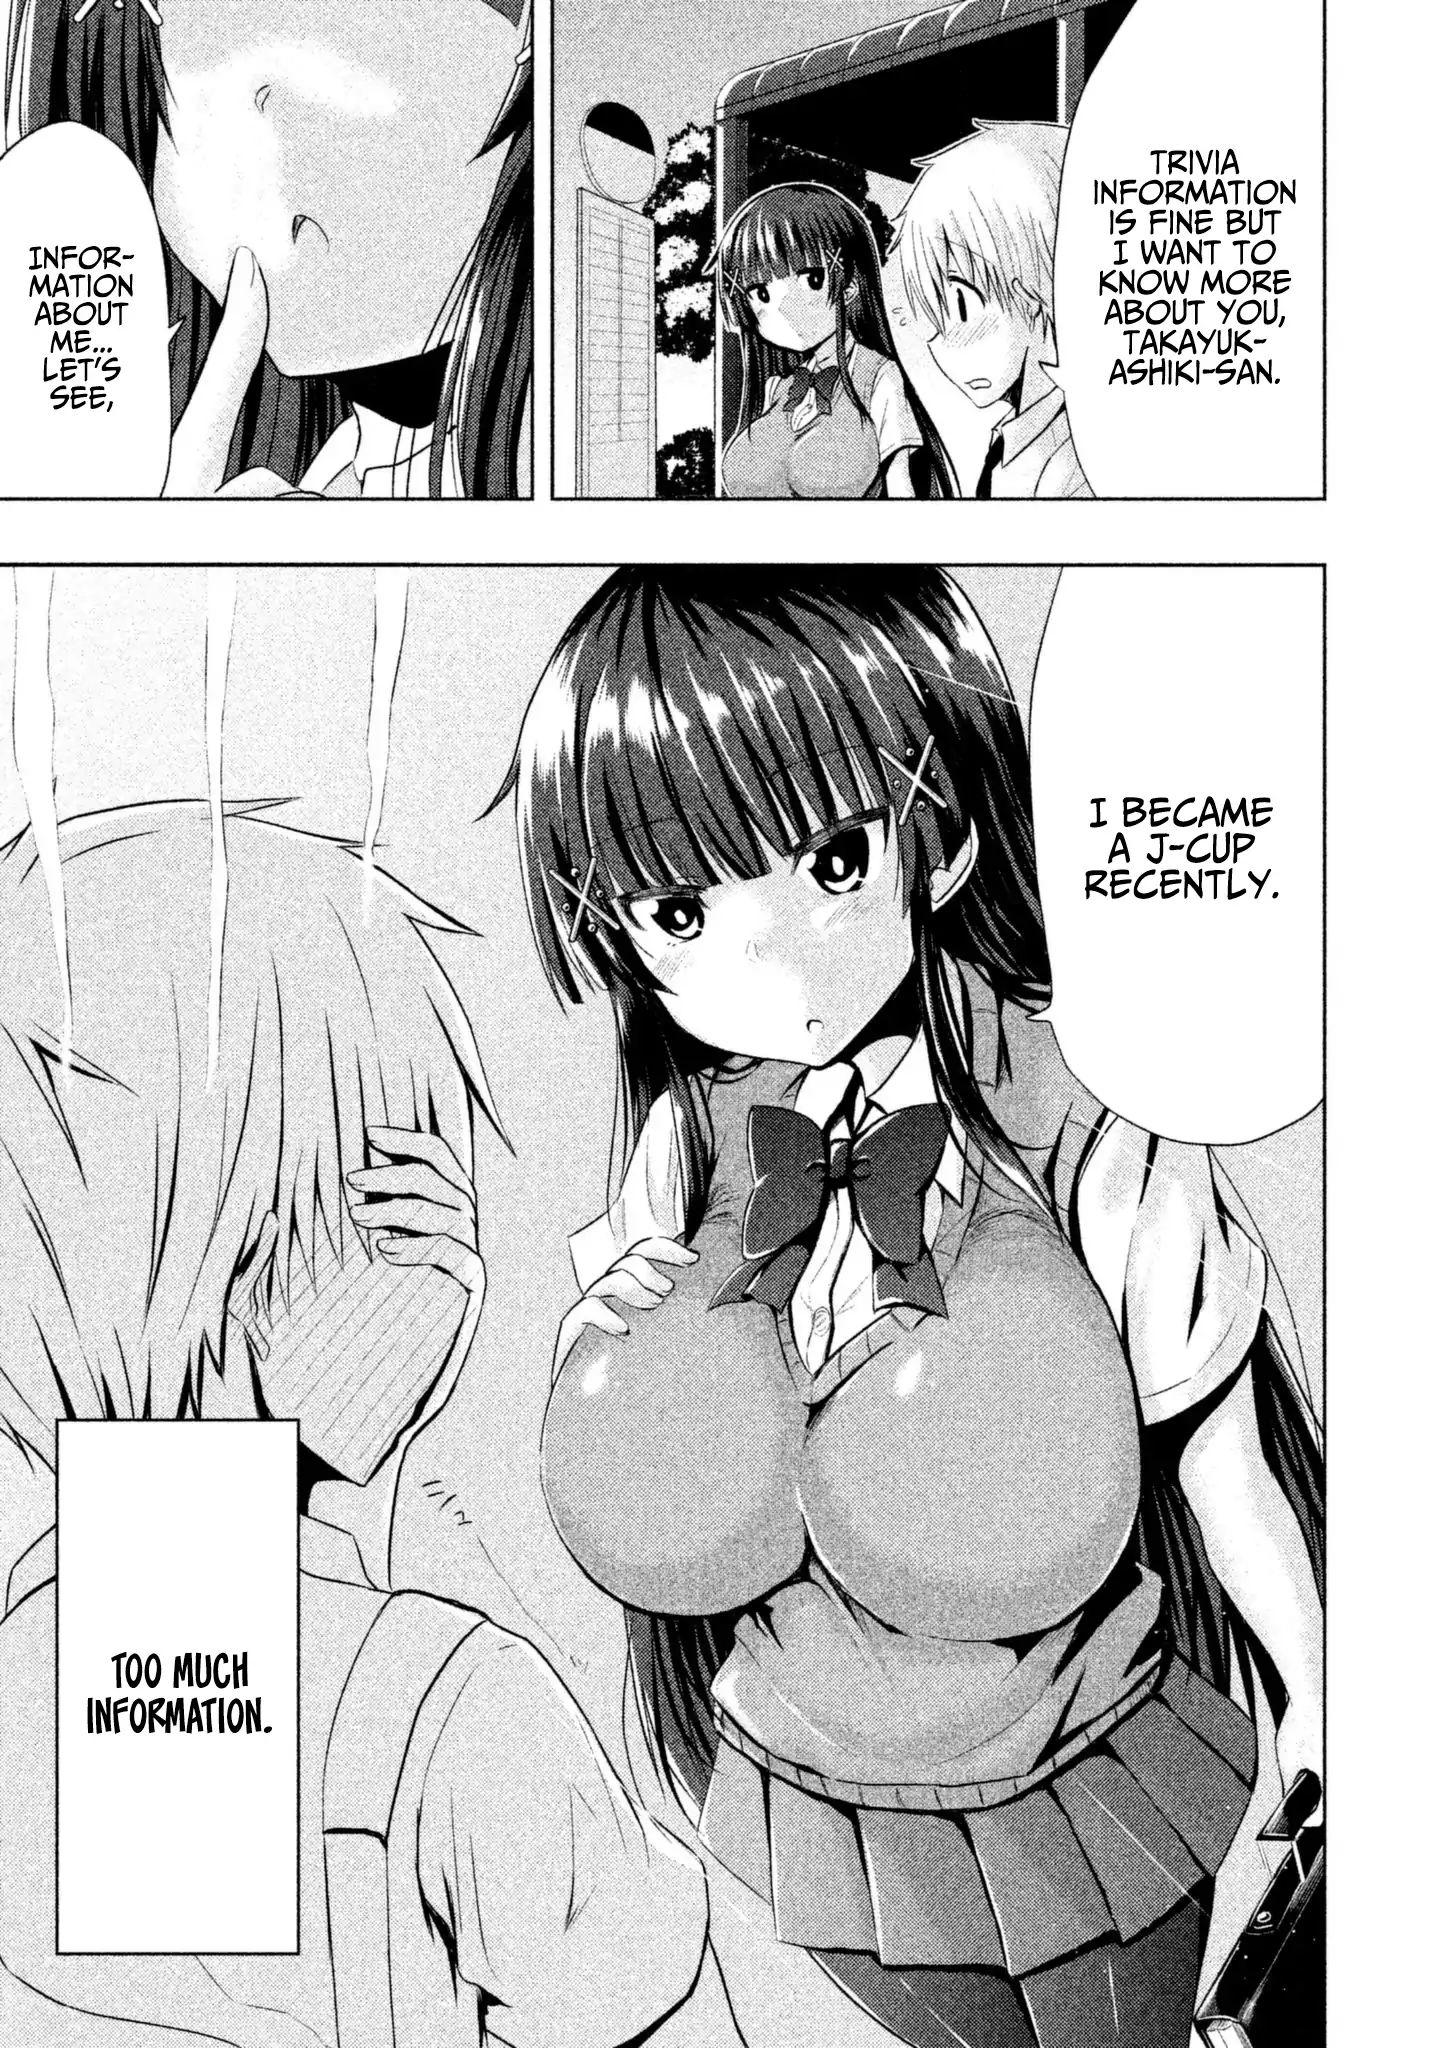 A Girl Who Is Very Well-Informed About Weird Knowledge, Takayukashiki Souko-San Vol.1 Chapter 1: Chest page 12 - Mangakakalots.com